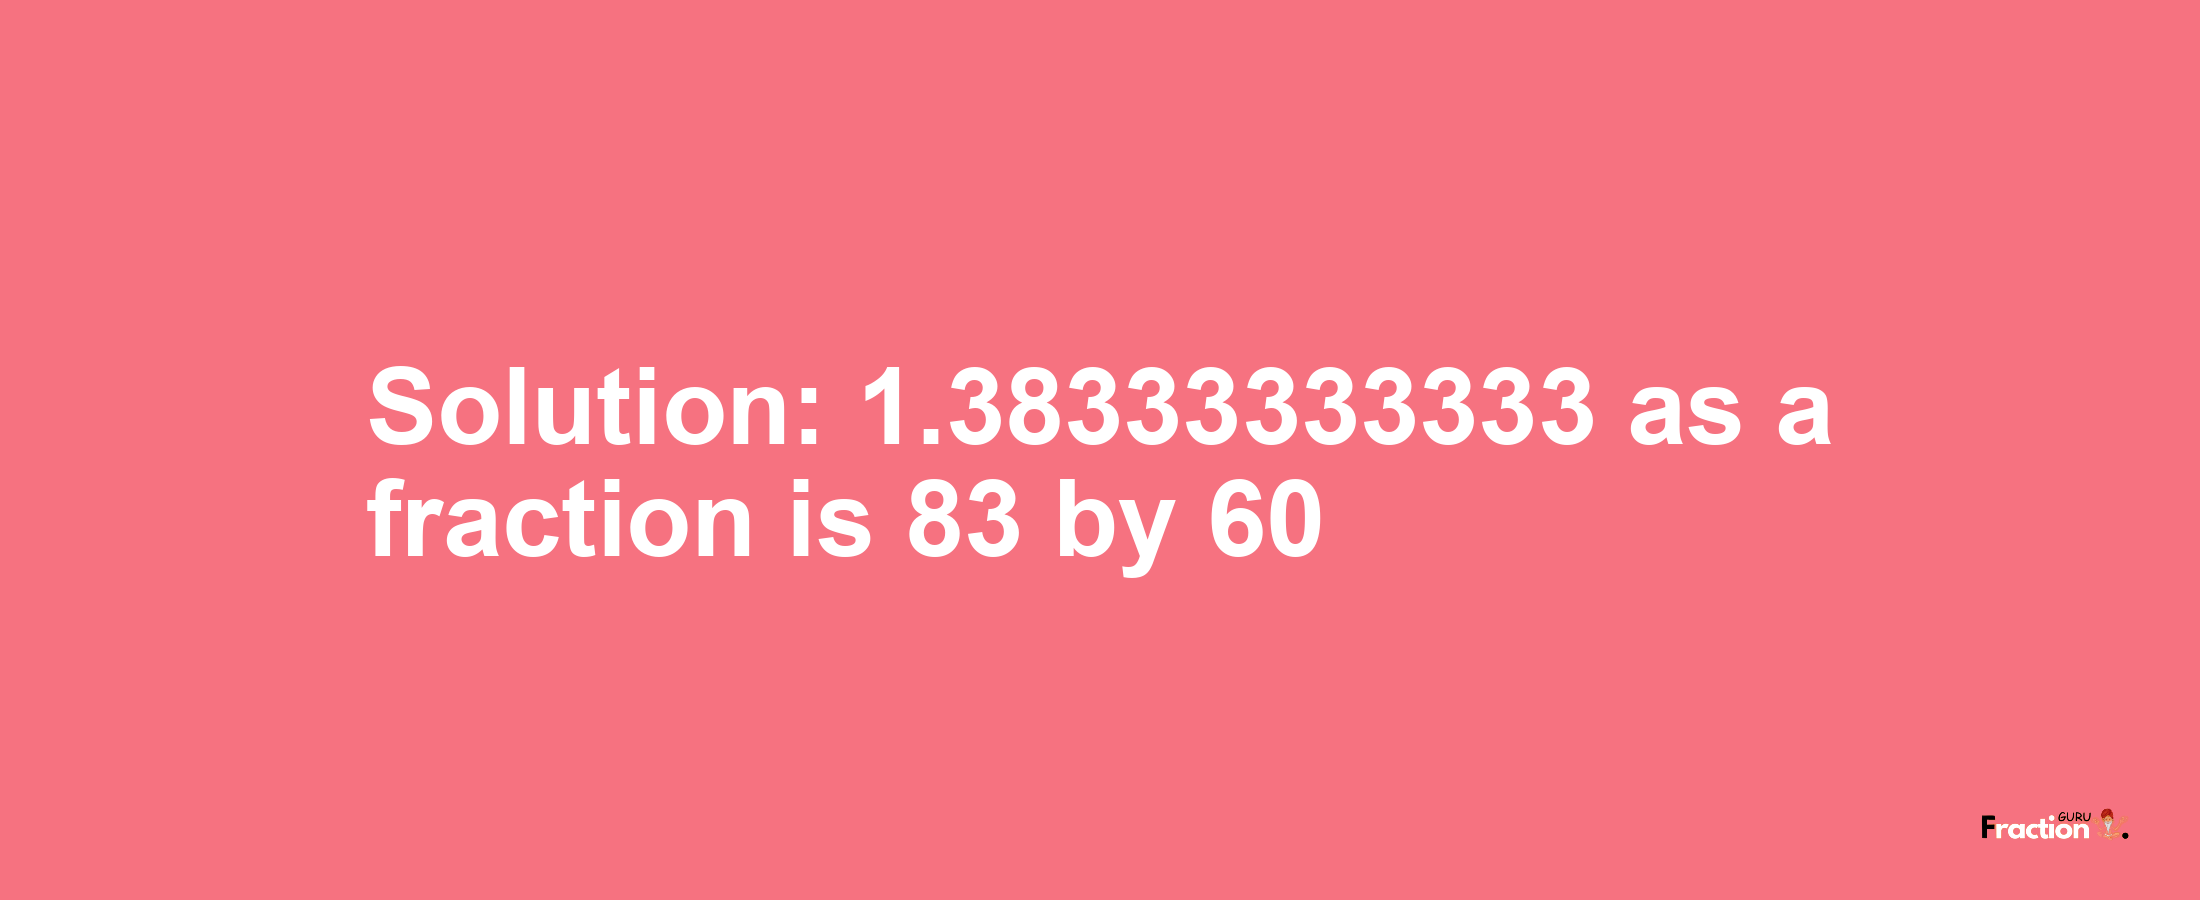 Solution:1.38333333333 as a fraction is 83/60